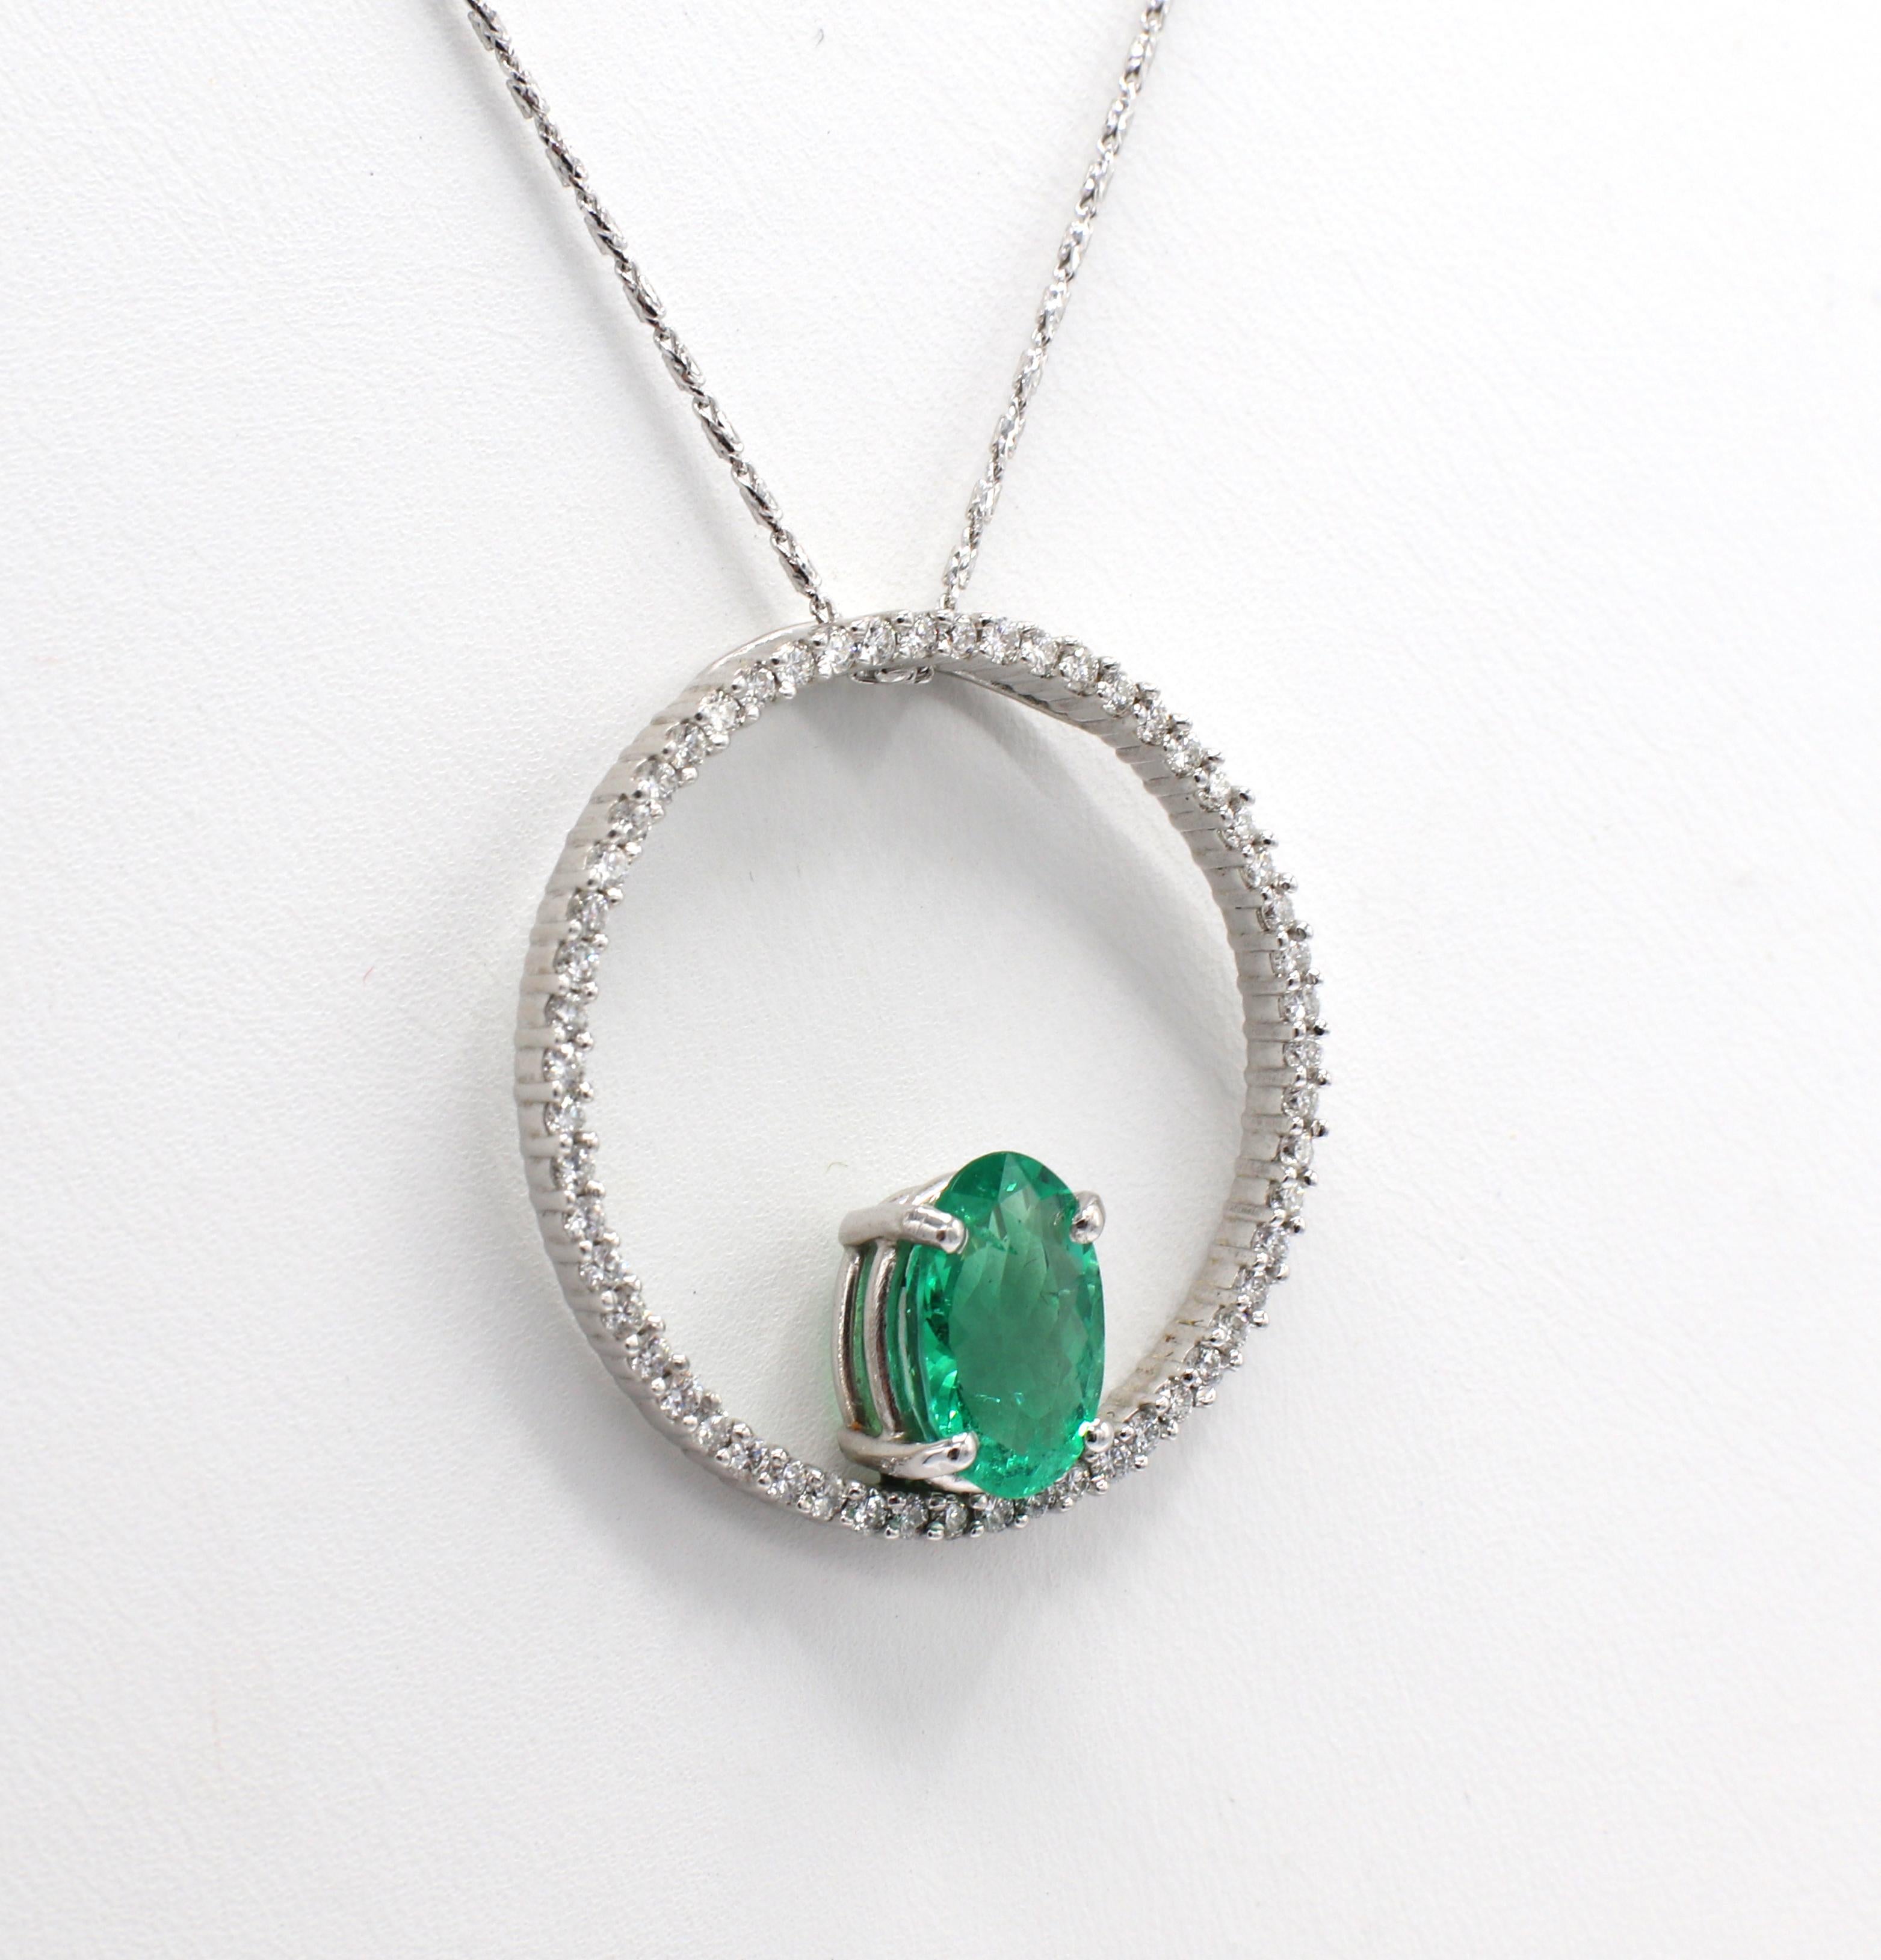 14 Karat White Gold Emerald & Natural Diamond Circle Pendant Drop Necklace
Metal: 14k white gold
Weight: 7.13 grams
Diamonds: Approx. .75 CTW G VS natural diamonds
Emerald: Approx. 2 carats, oval shape
Chain length: 18 inches
Pendant: 30mm